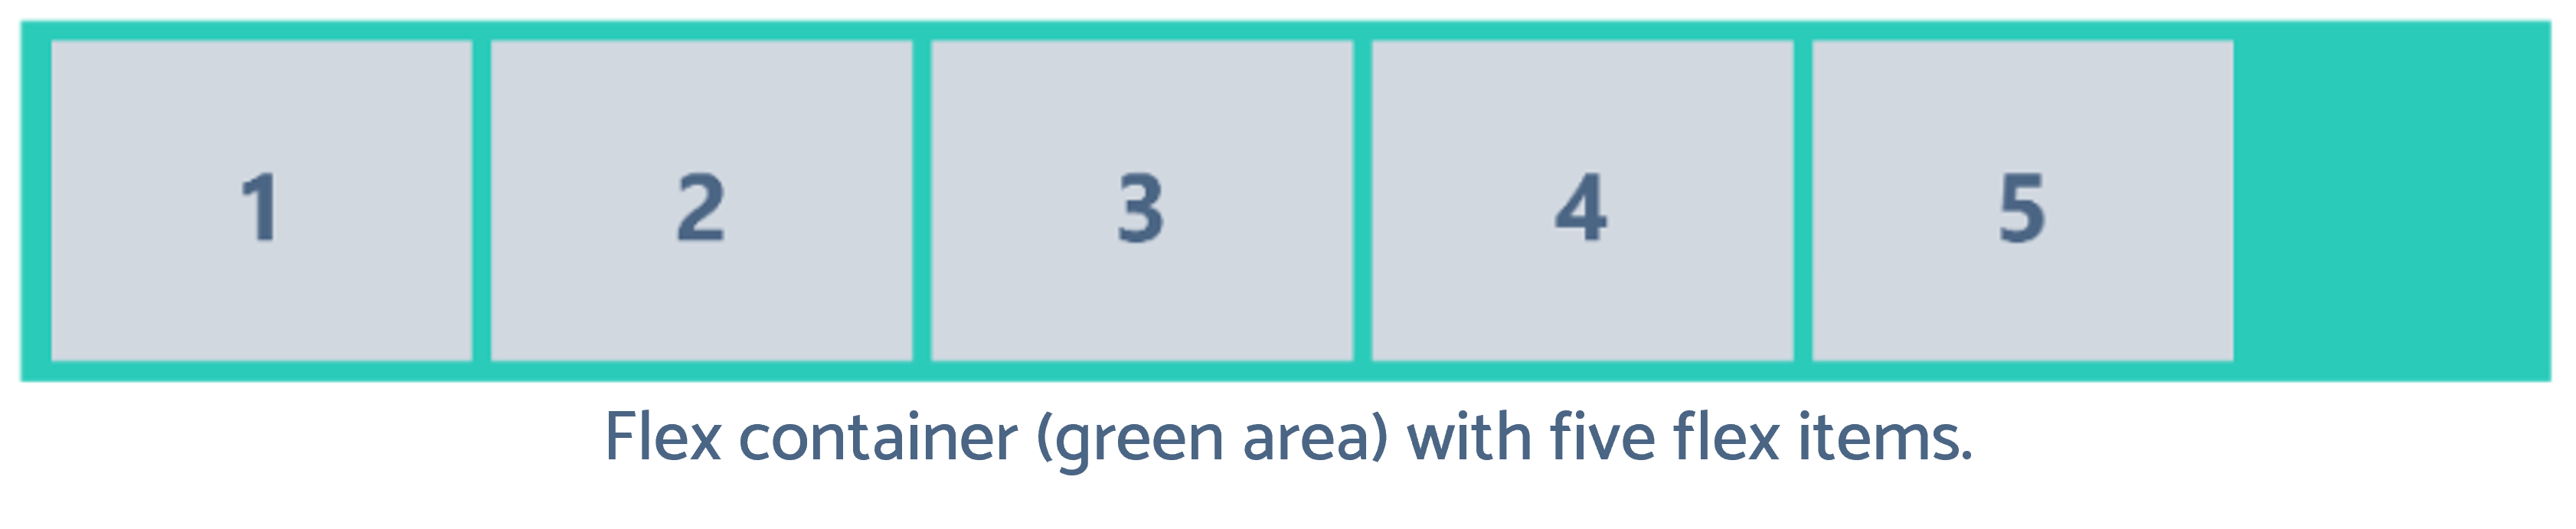 Flex container (green area) with five flex items